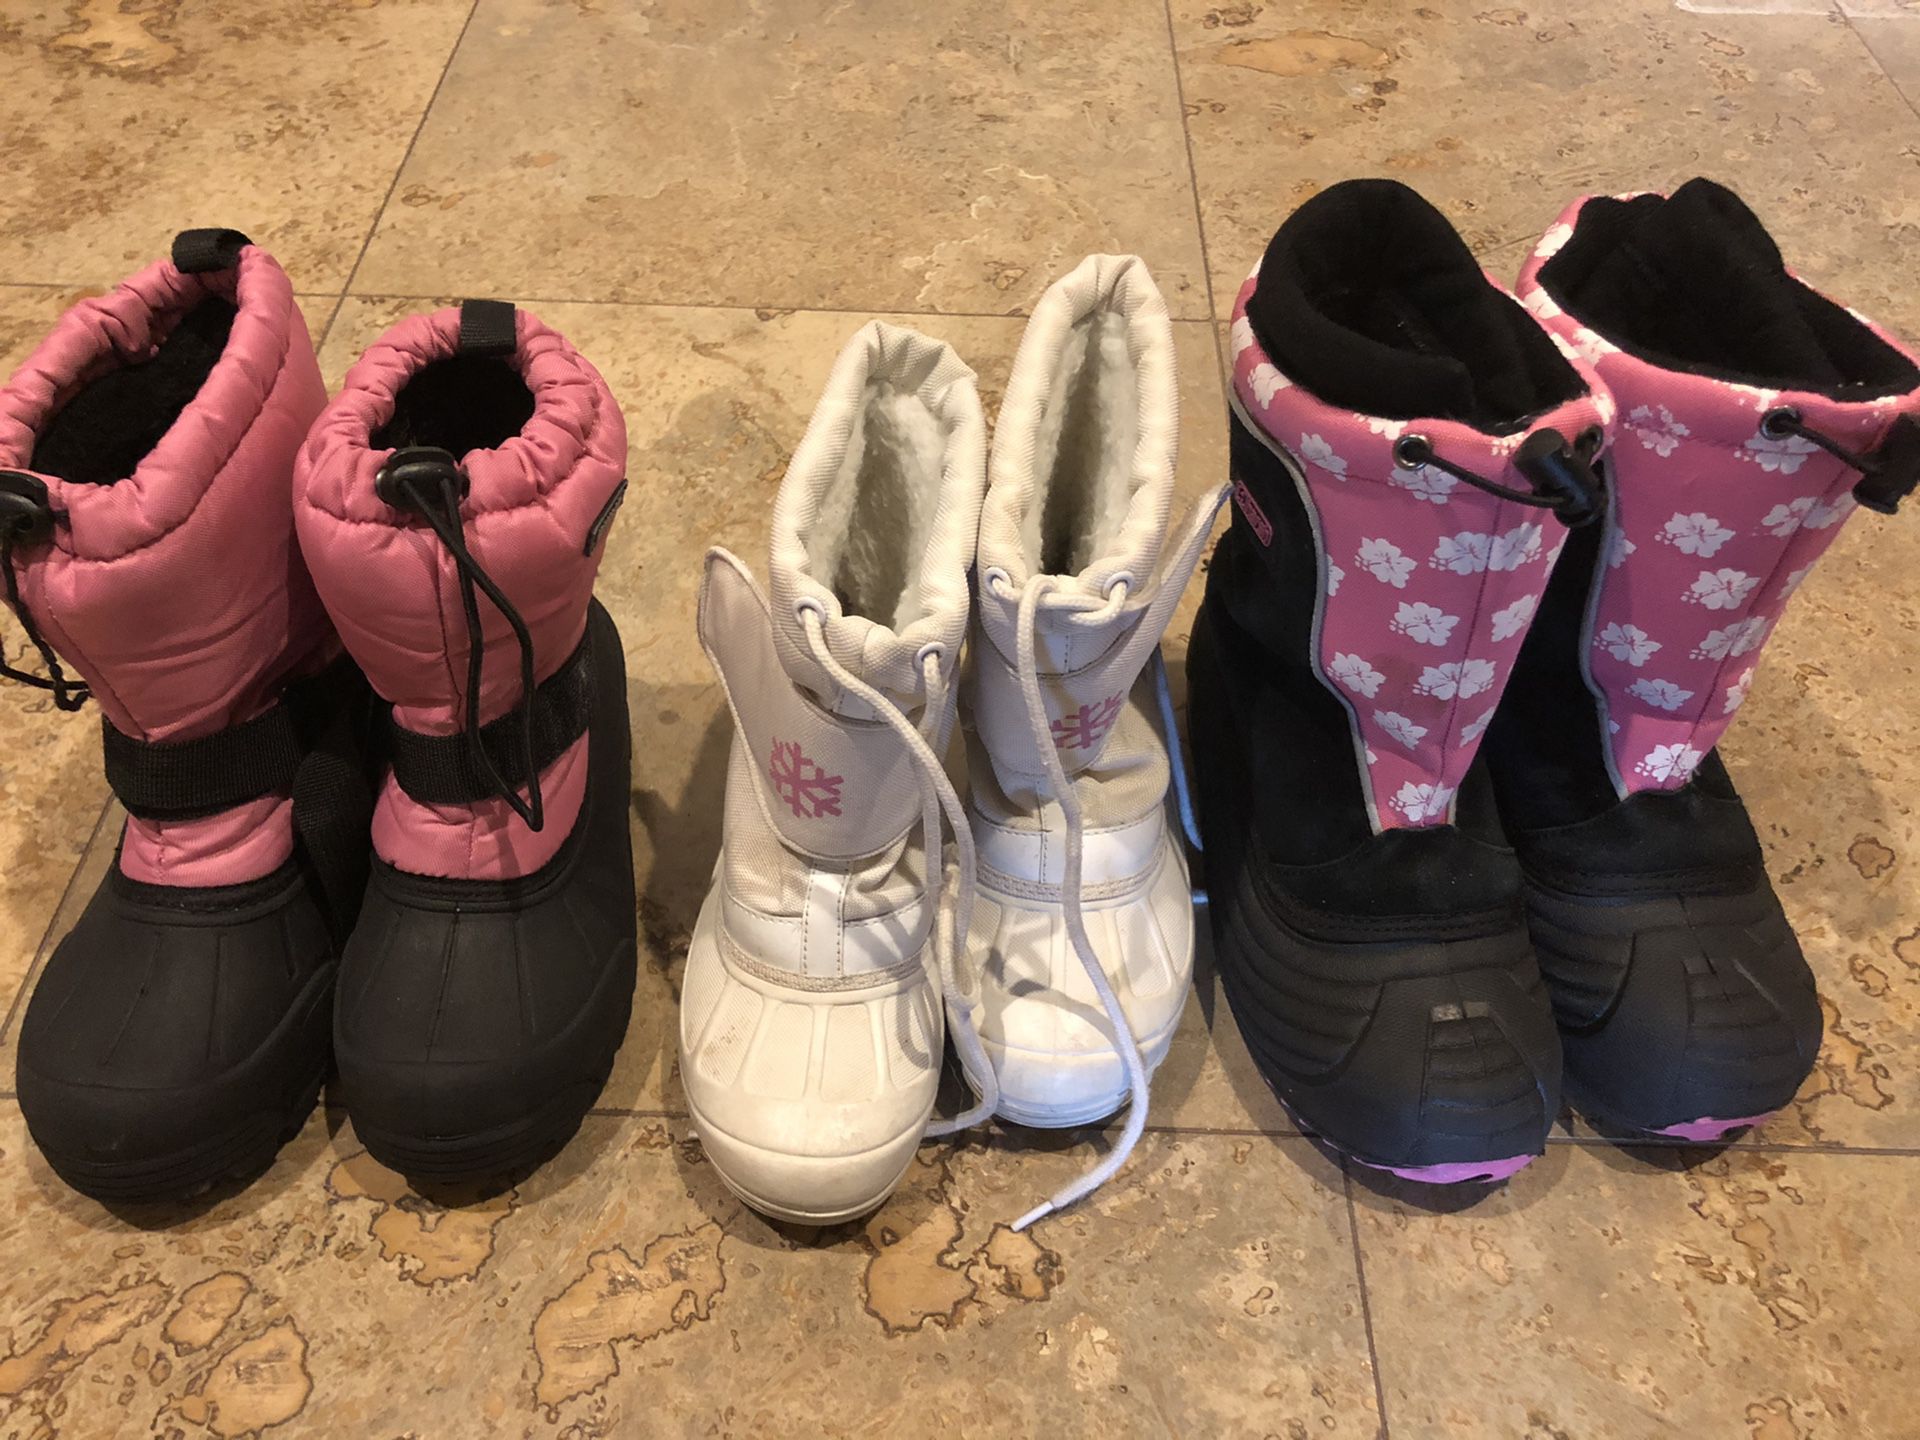 Kids Snow Boots Size 12, size 1, size 2 Girls